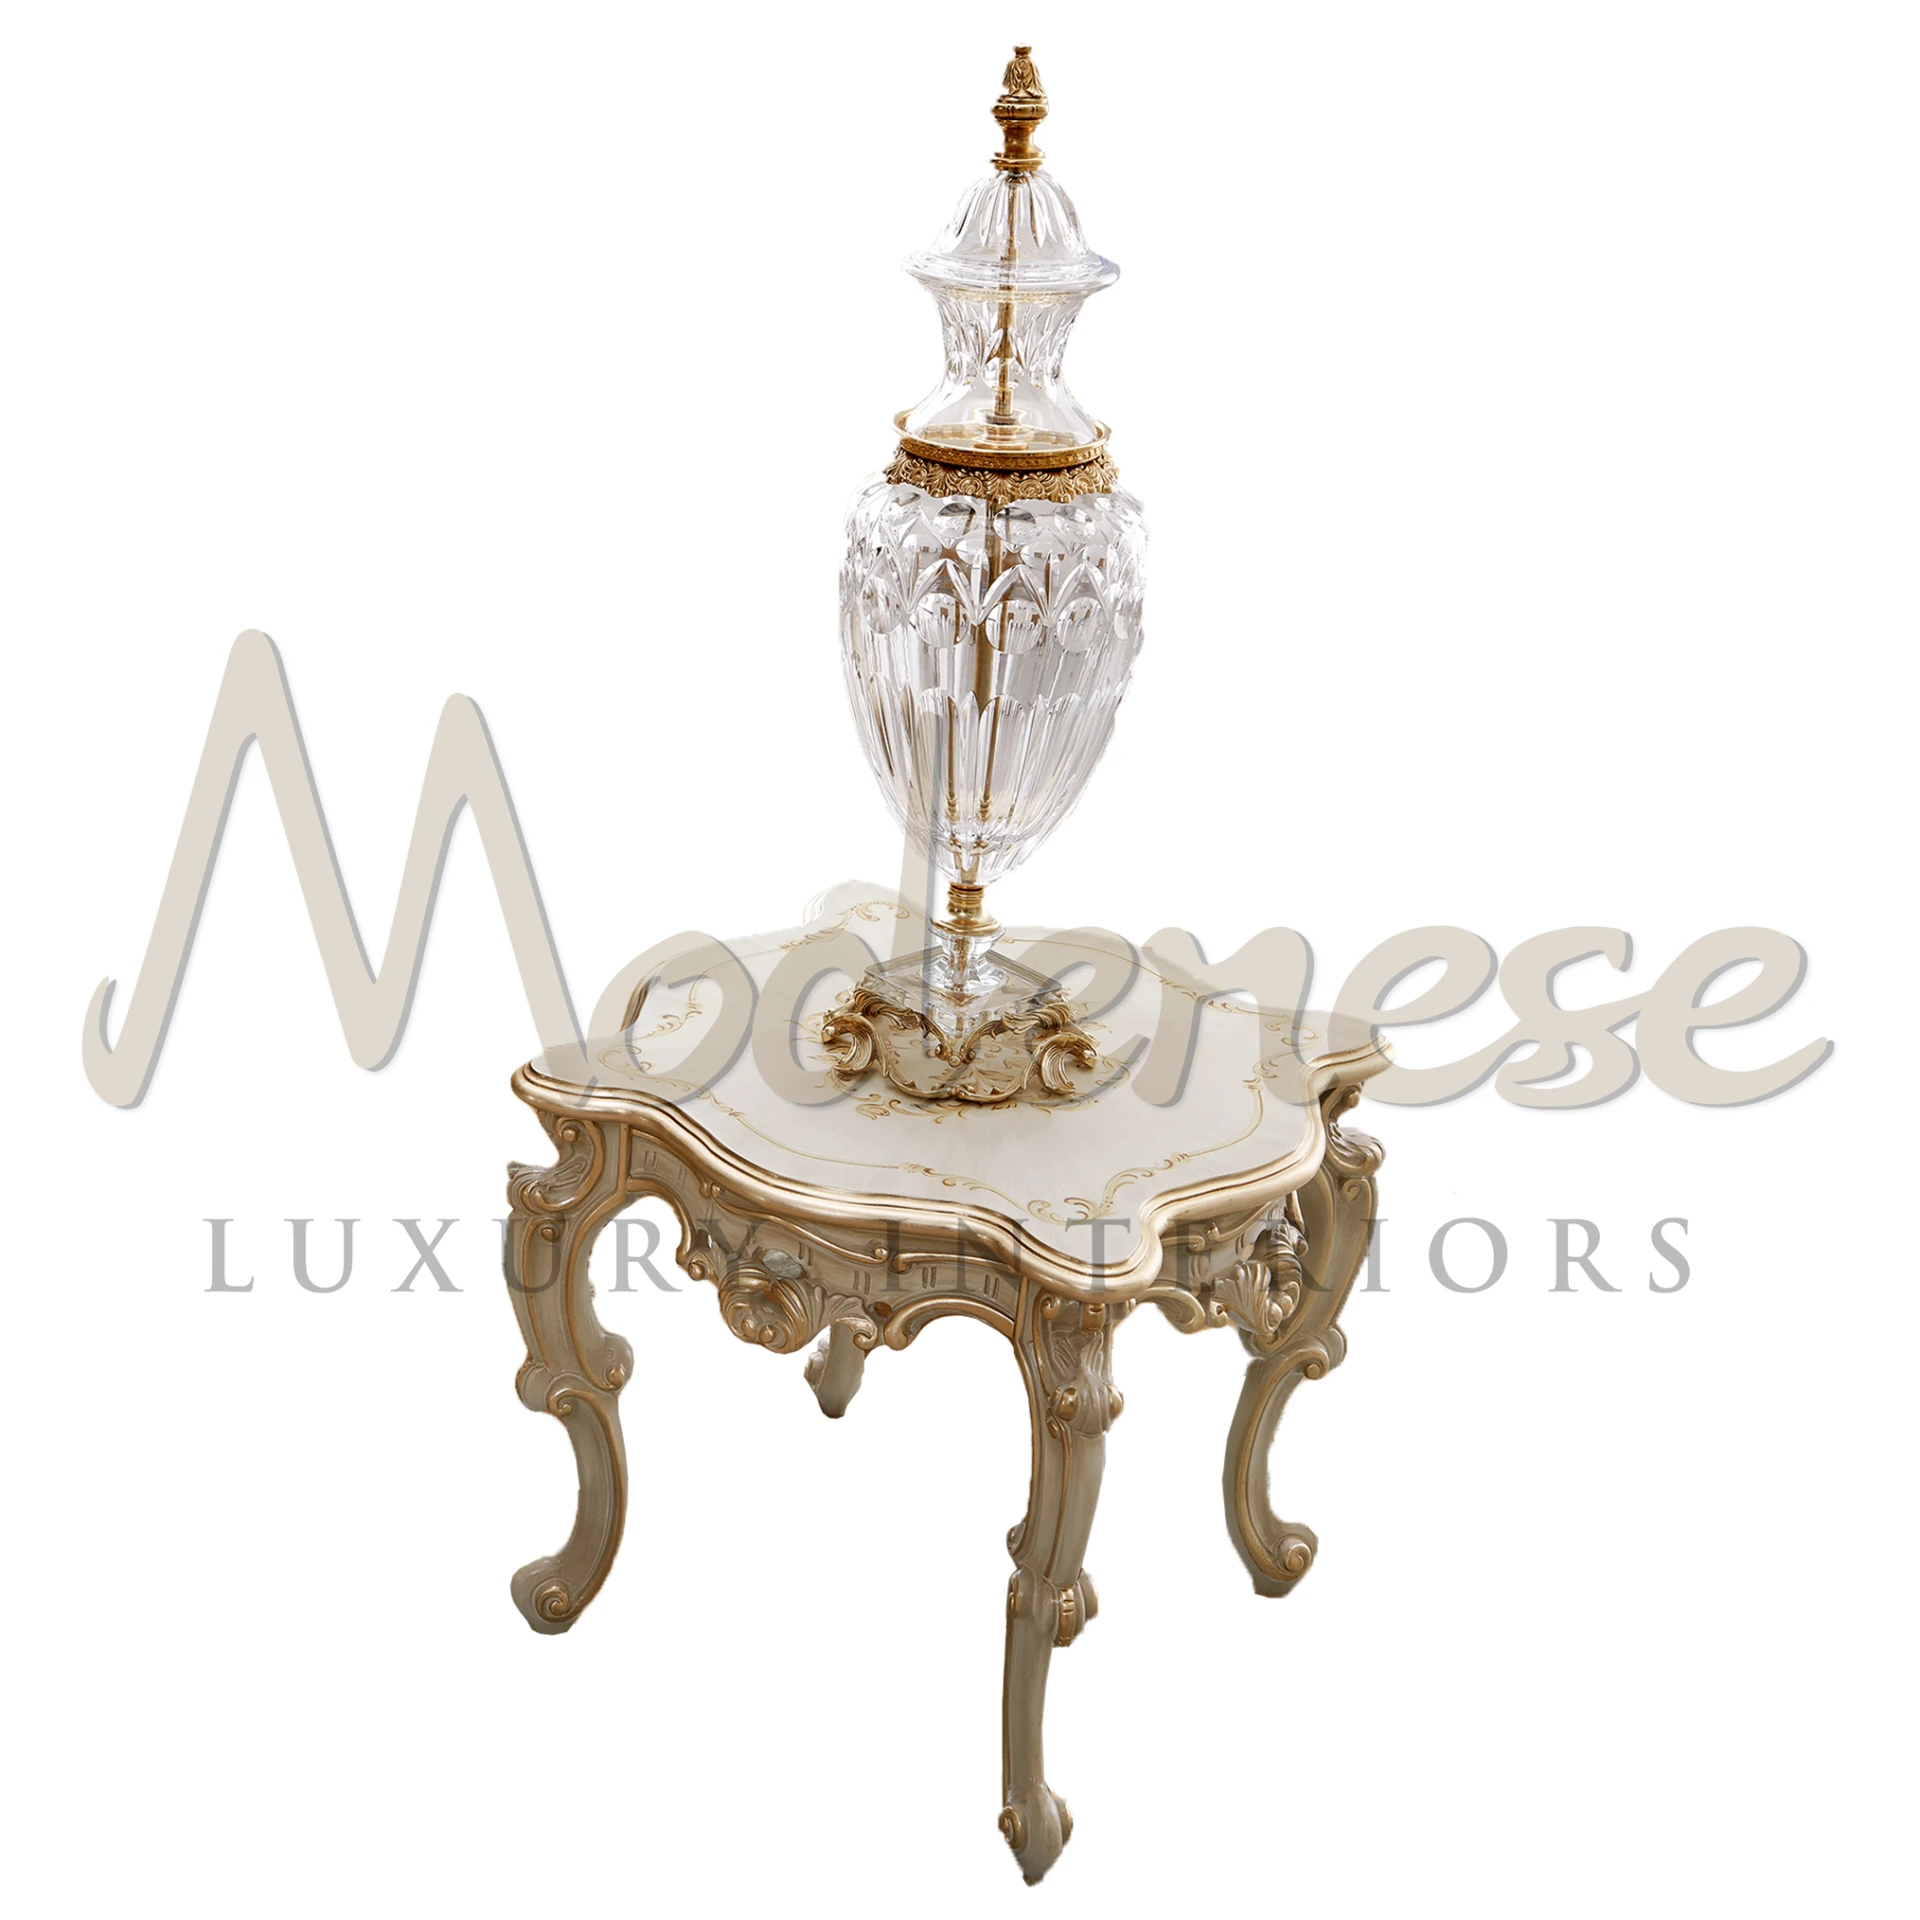 Elegant Marble Side Table by Modenese, embodying classic style with solid wood and gold leaf details for luxurious interiors.